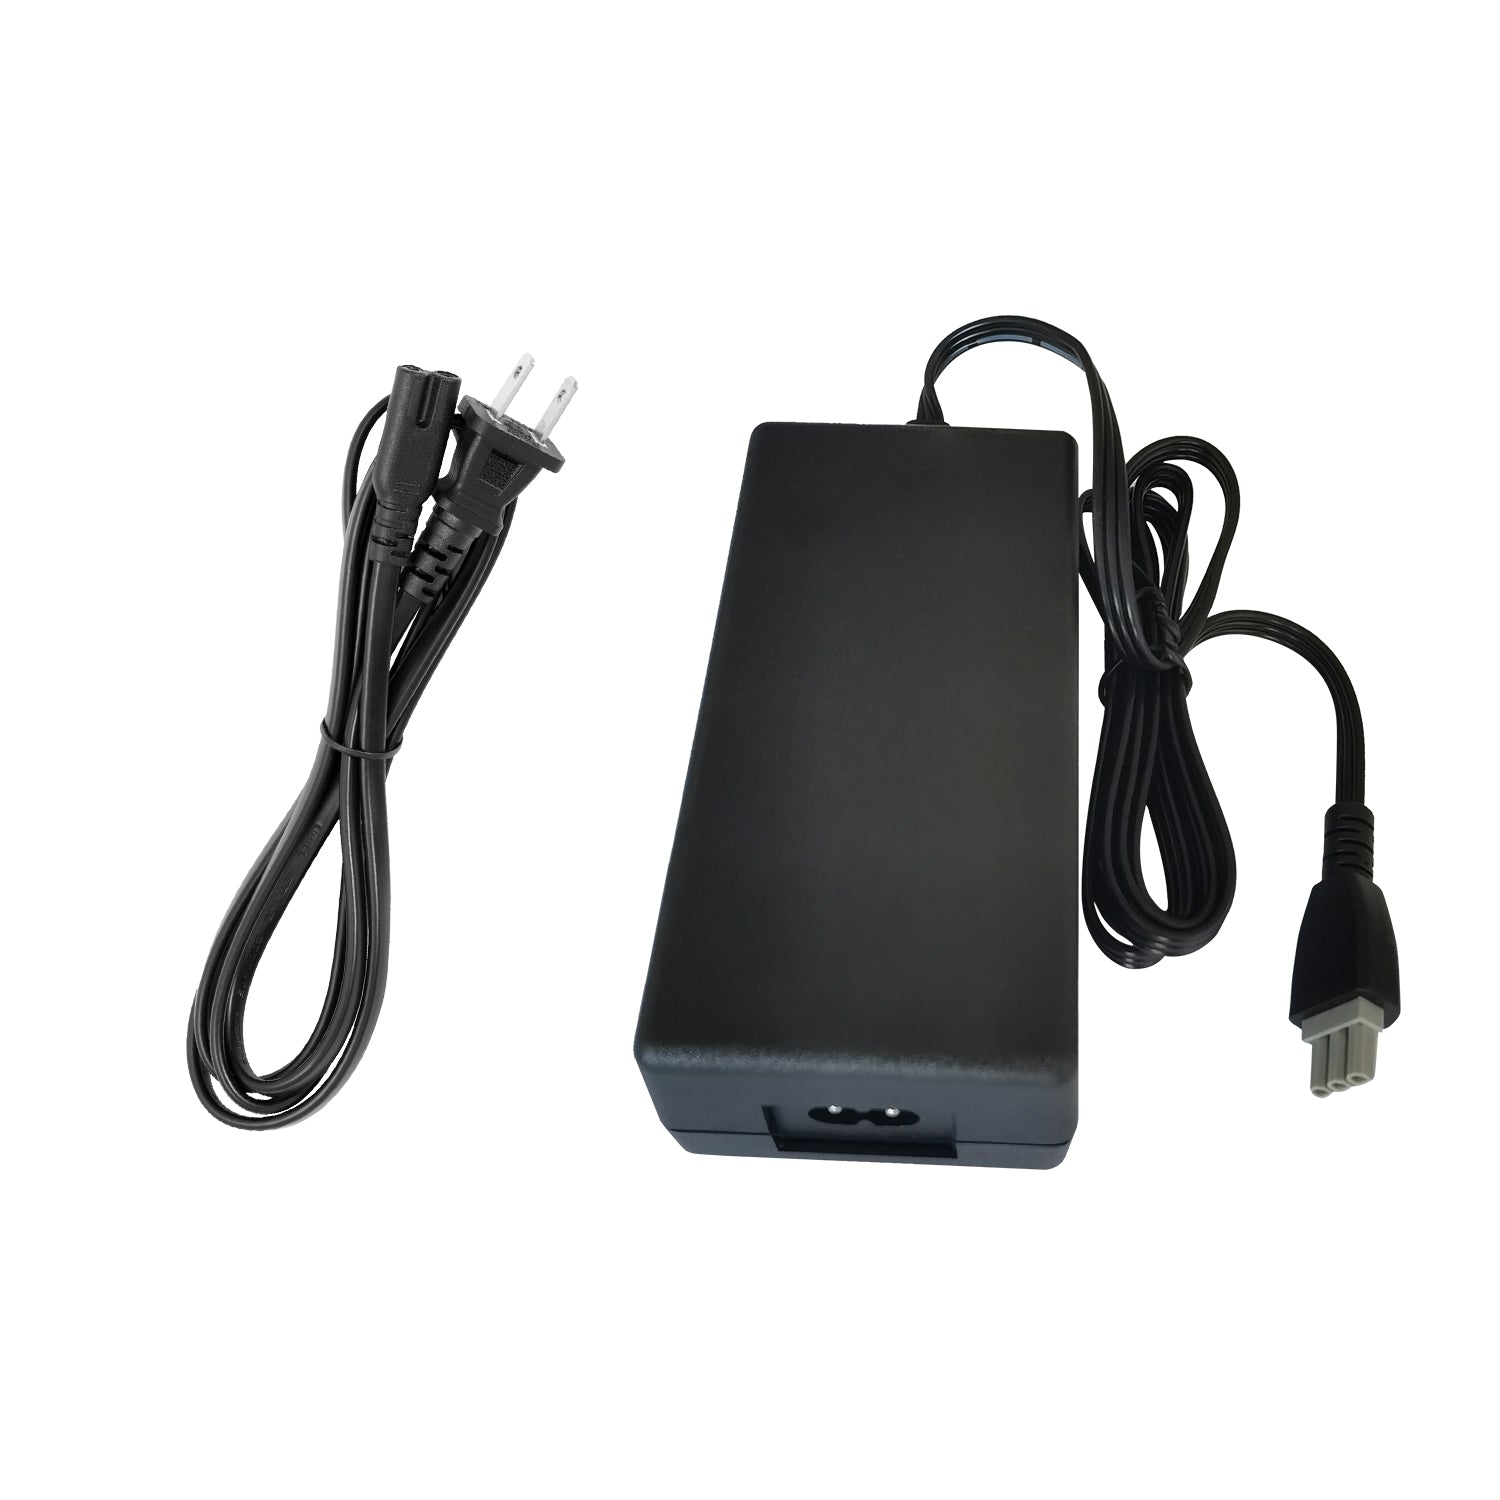 Power Adapter for HP OfficeJet 5510 All-in-One Printer.